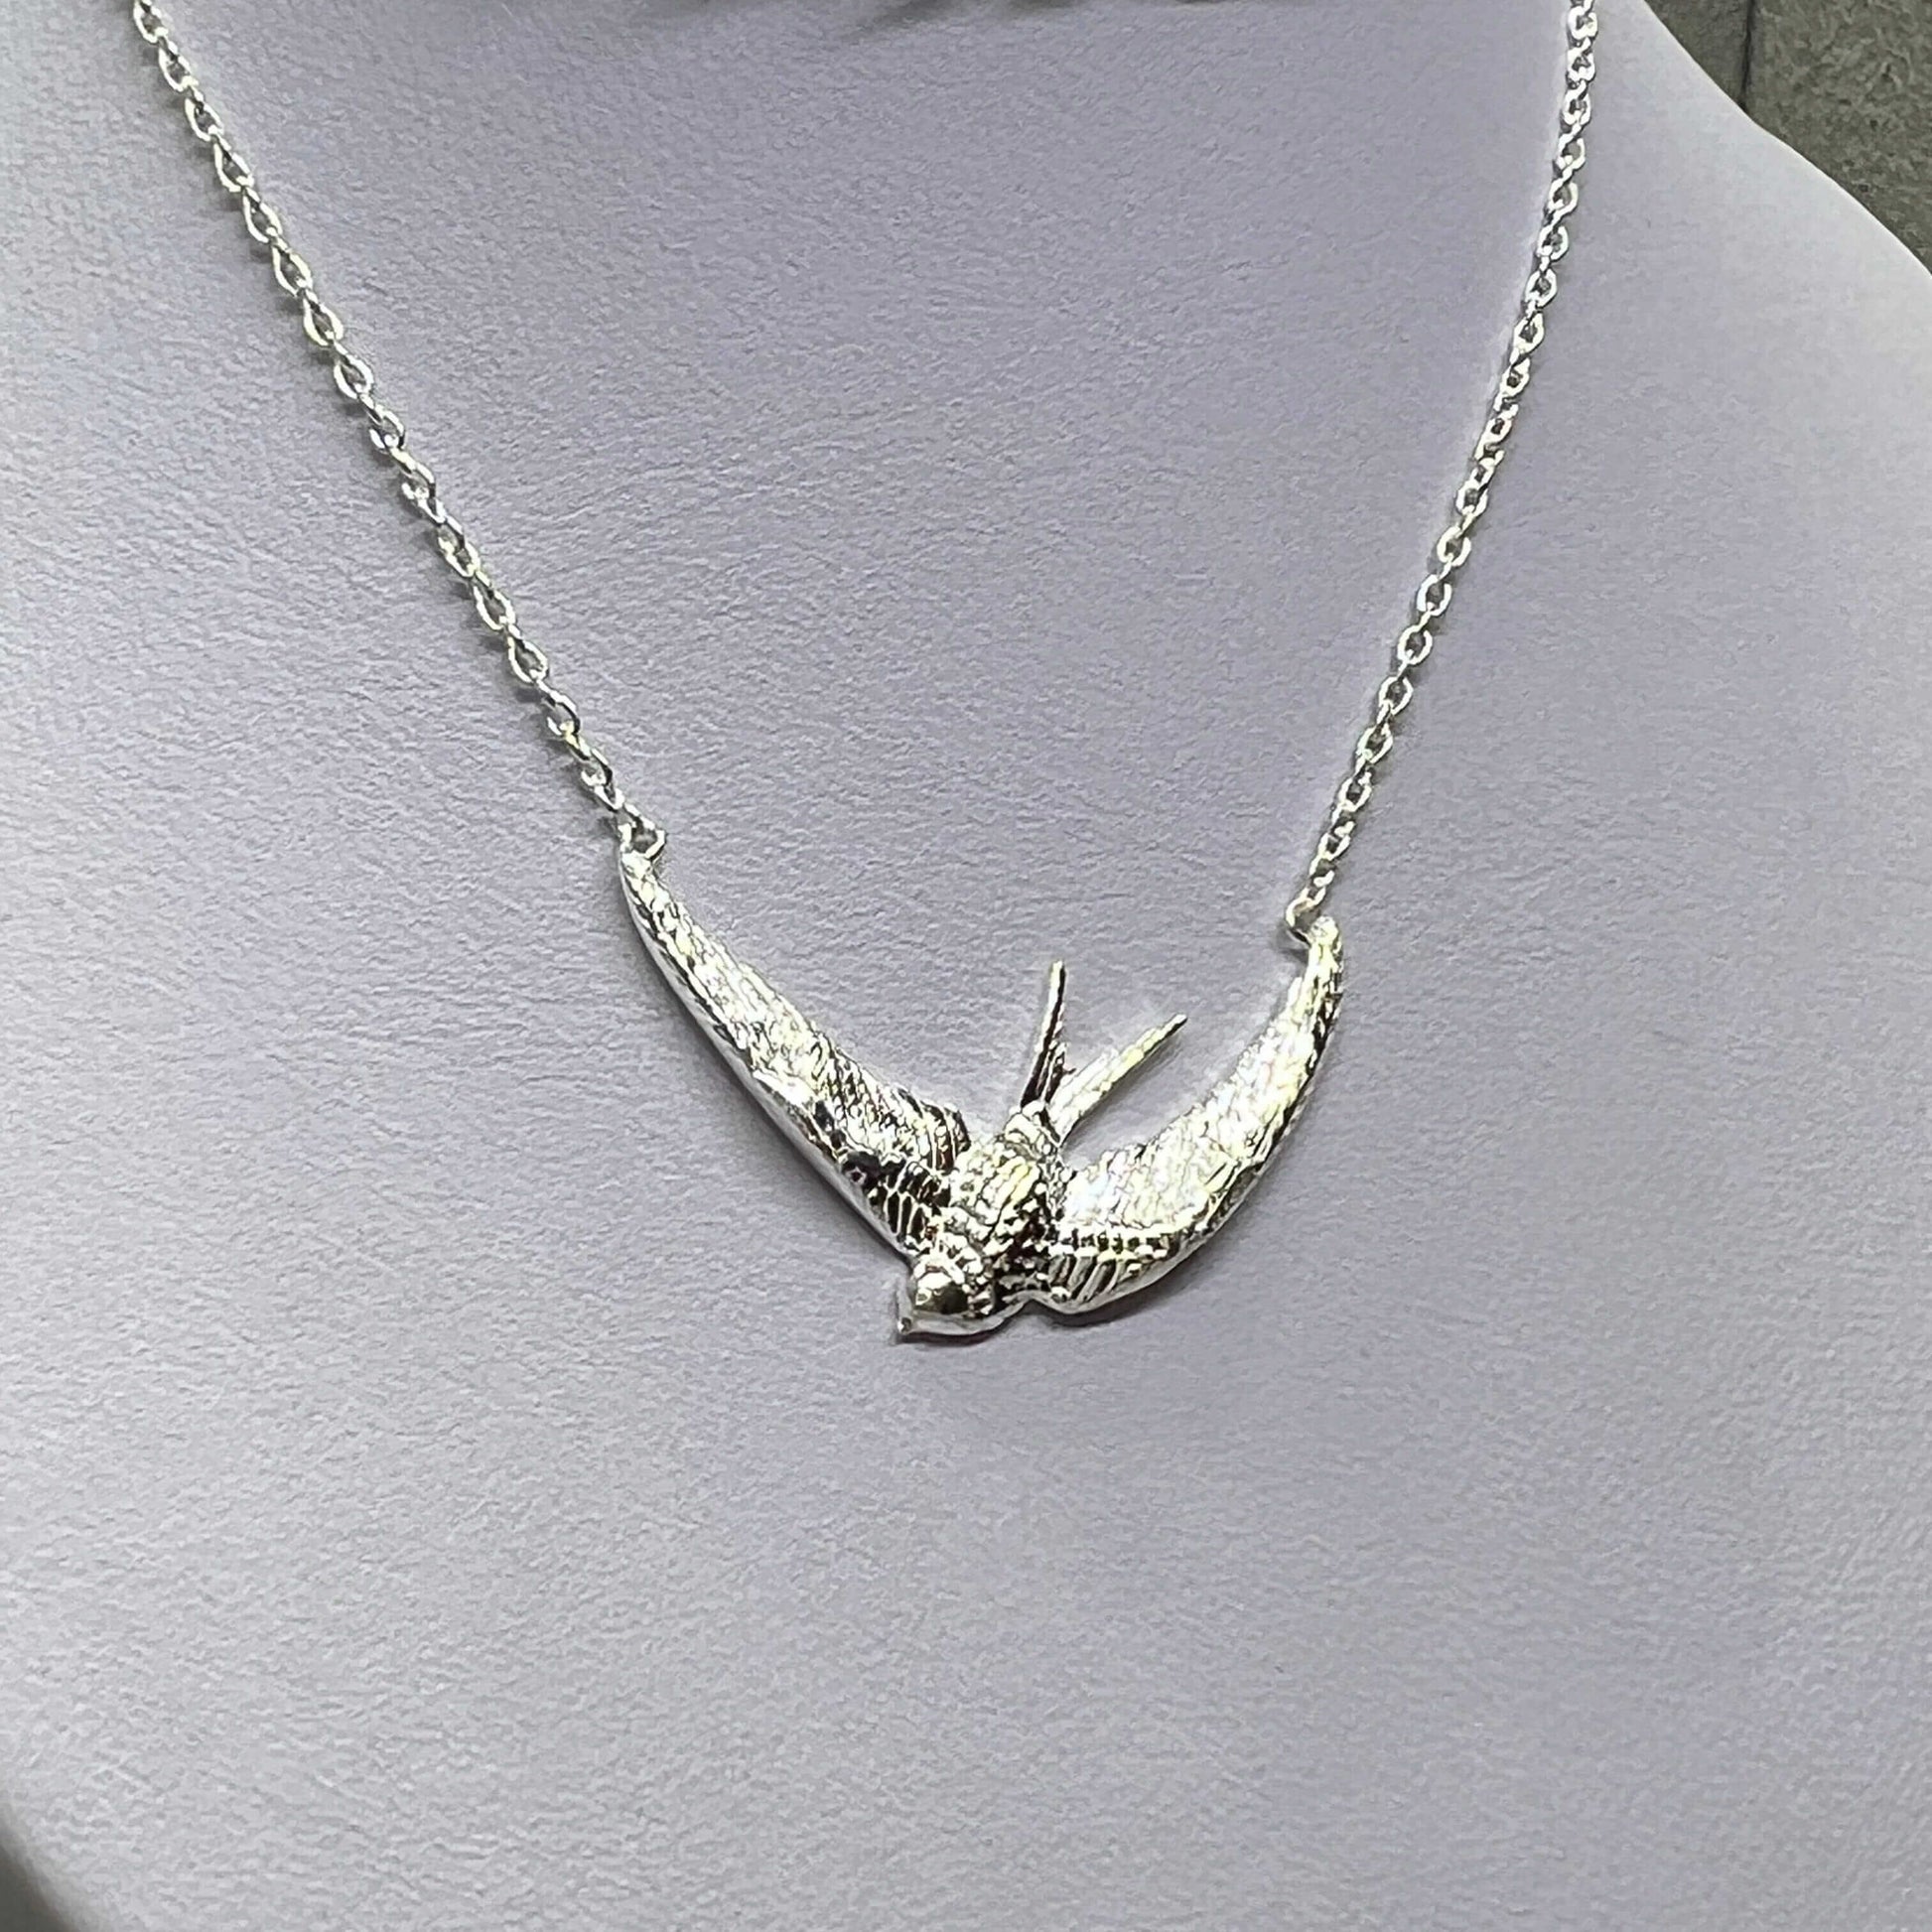 Swallow Necklace In Sterling Silver - Twelve Silver Trees